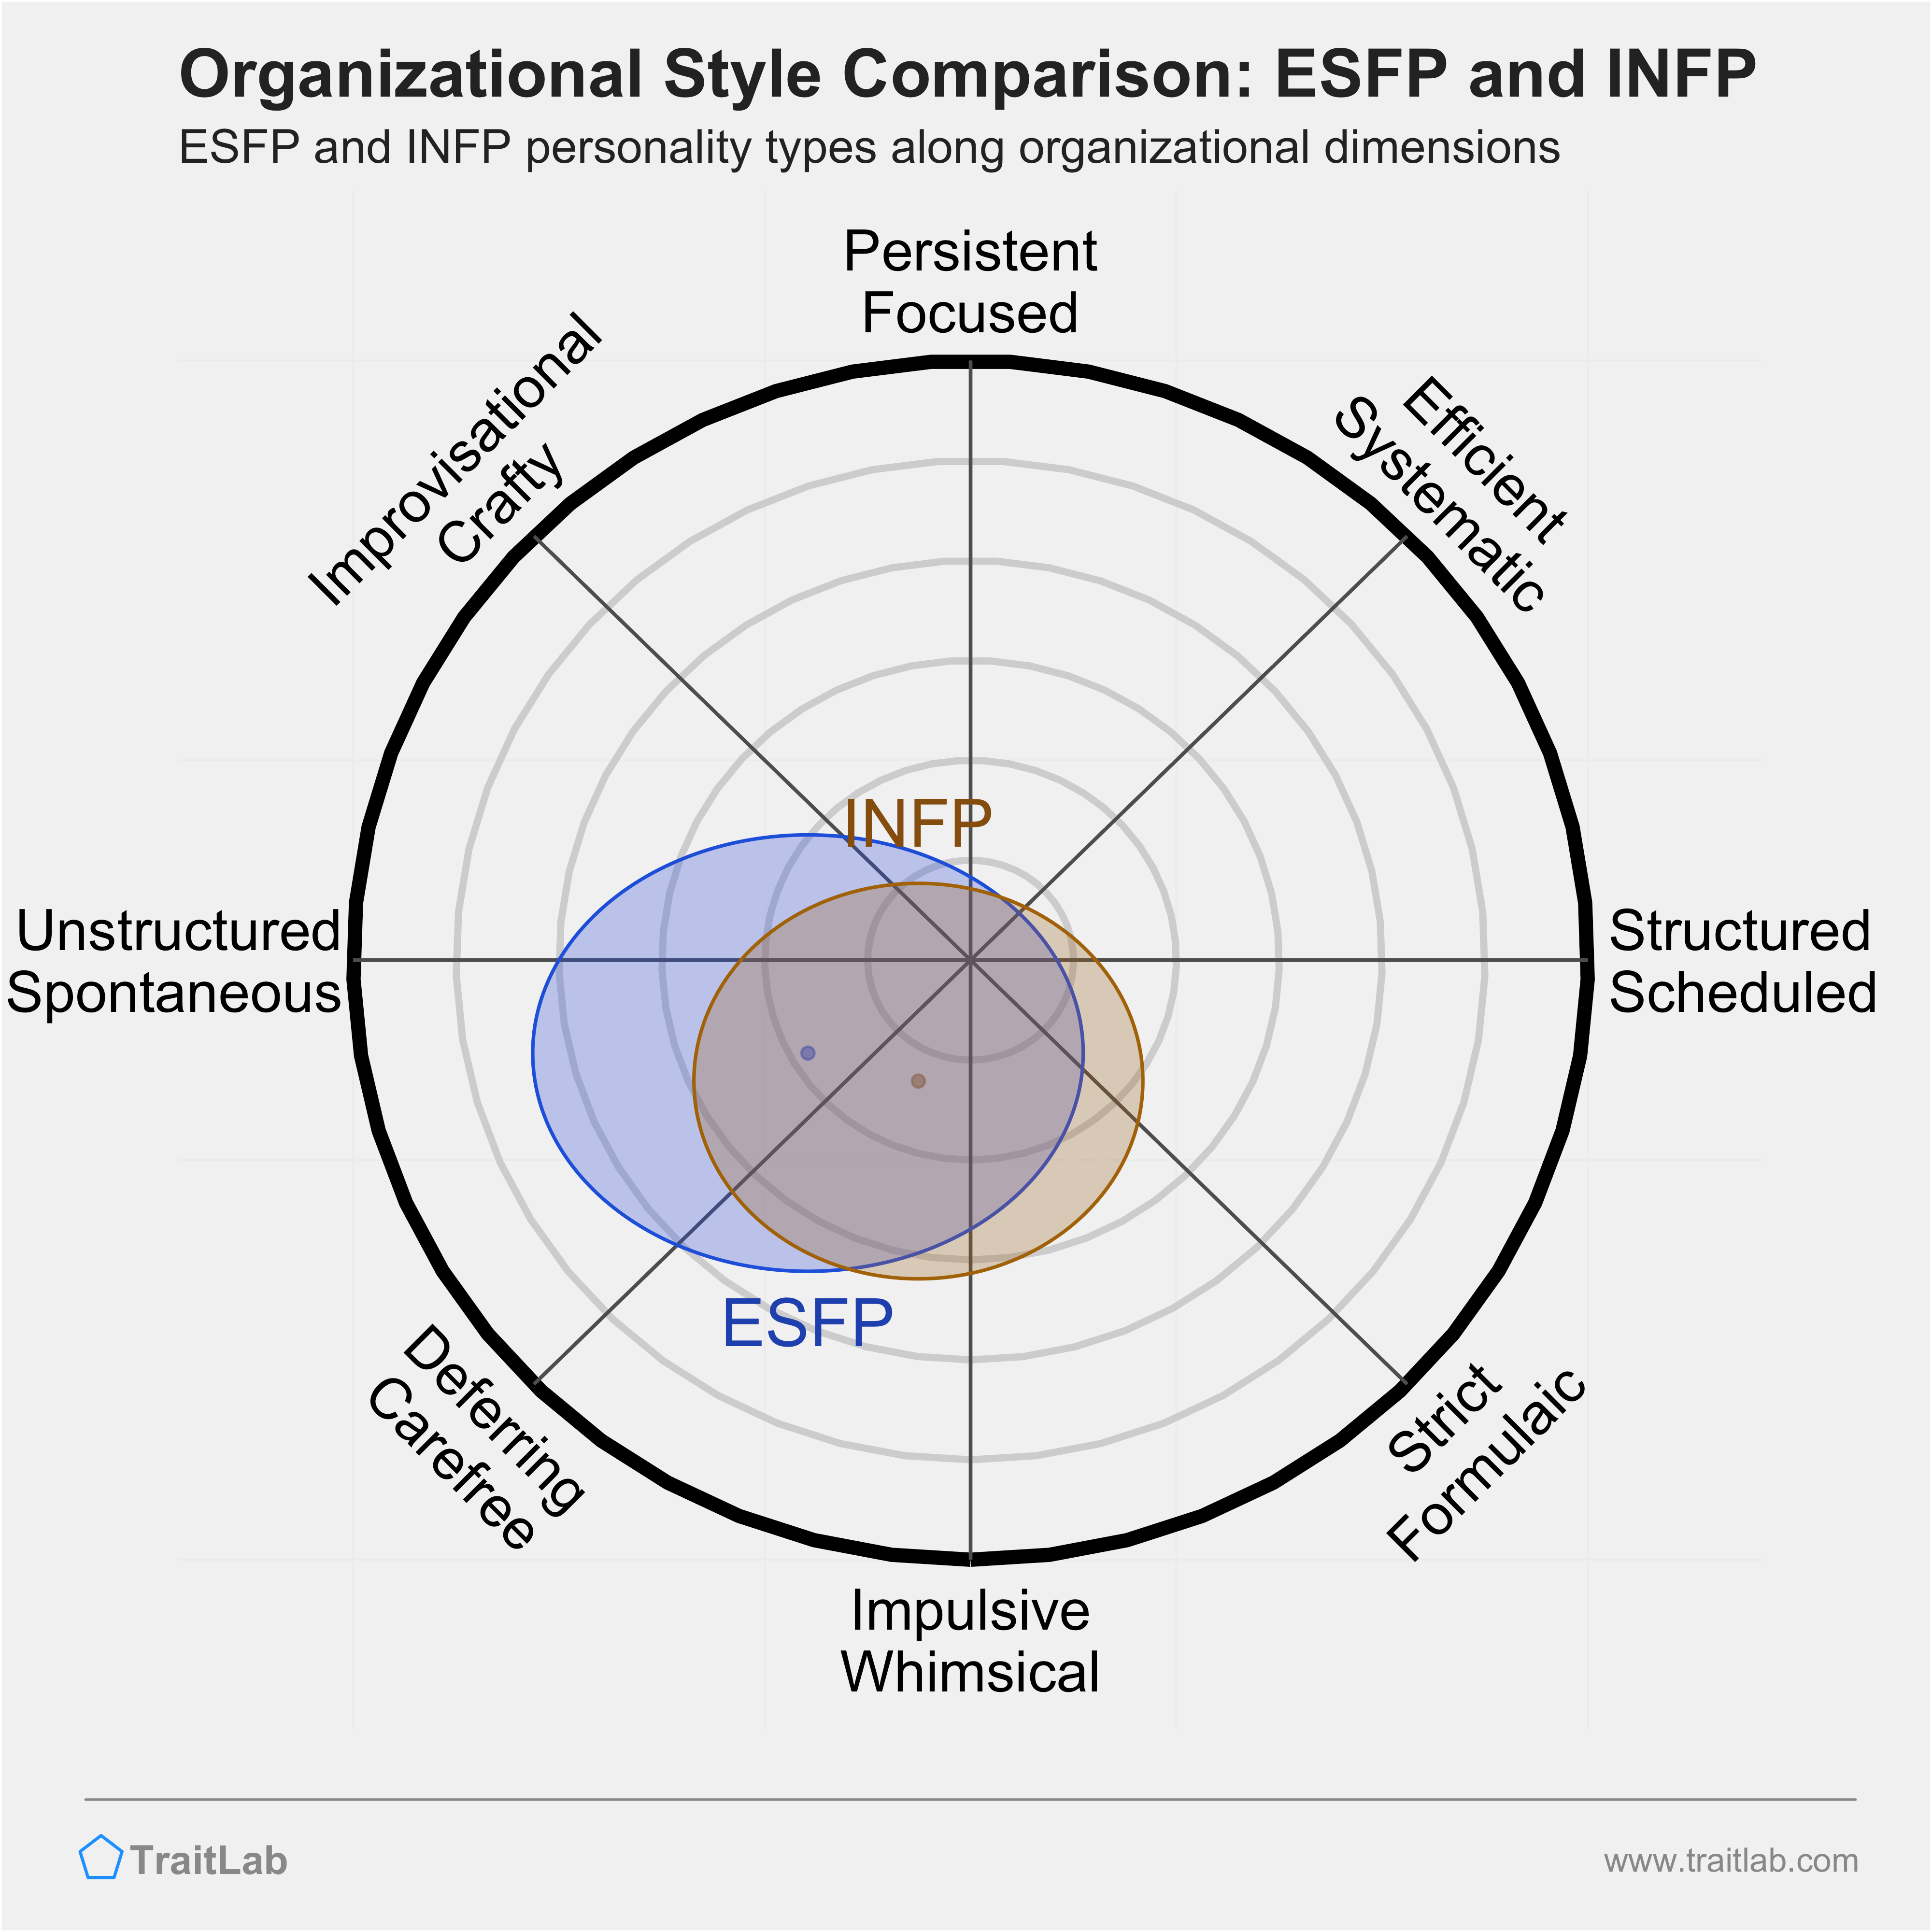 ESFP and INFP comparison across organizational dimensions